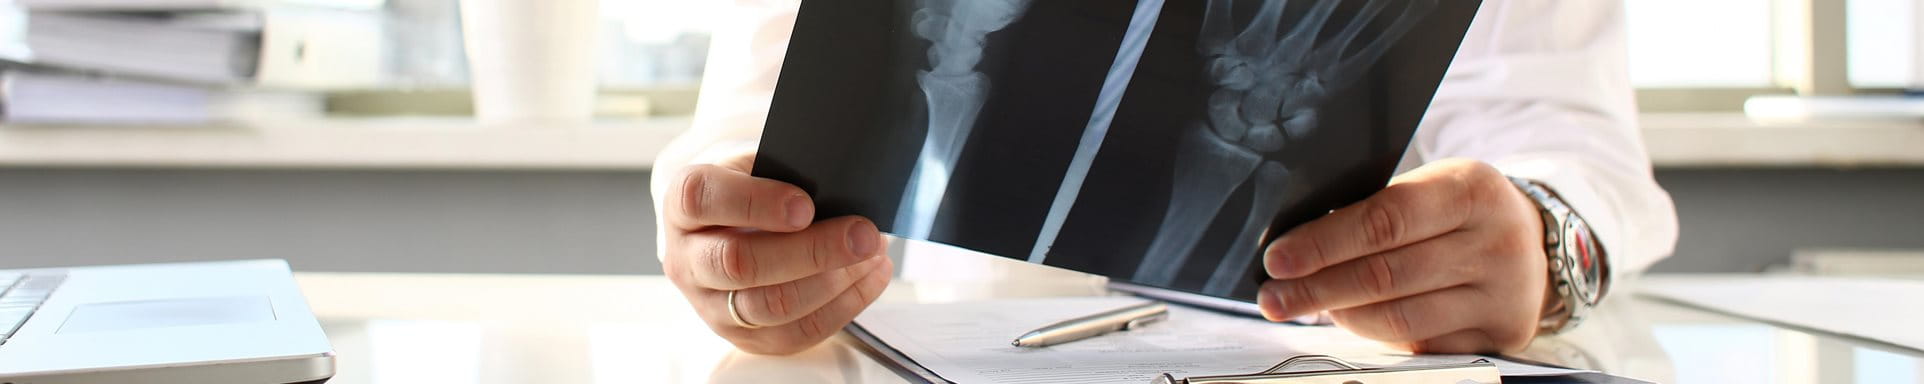 A doctor sits at the table and looks at an X-ray image